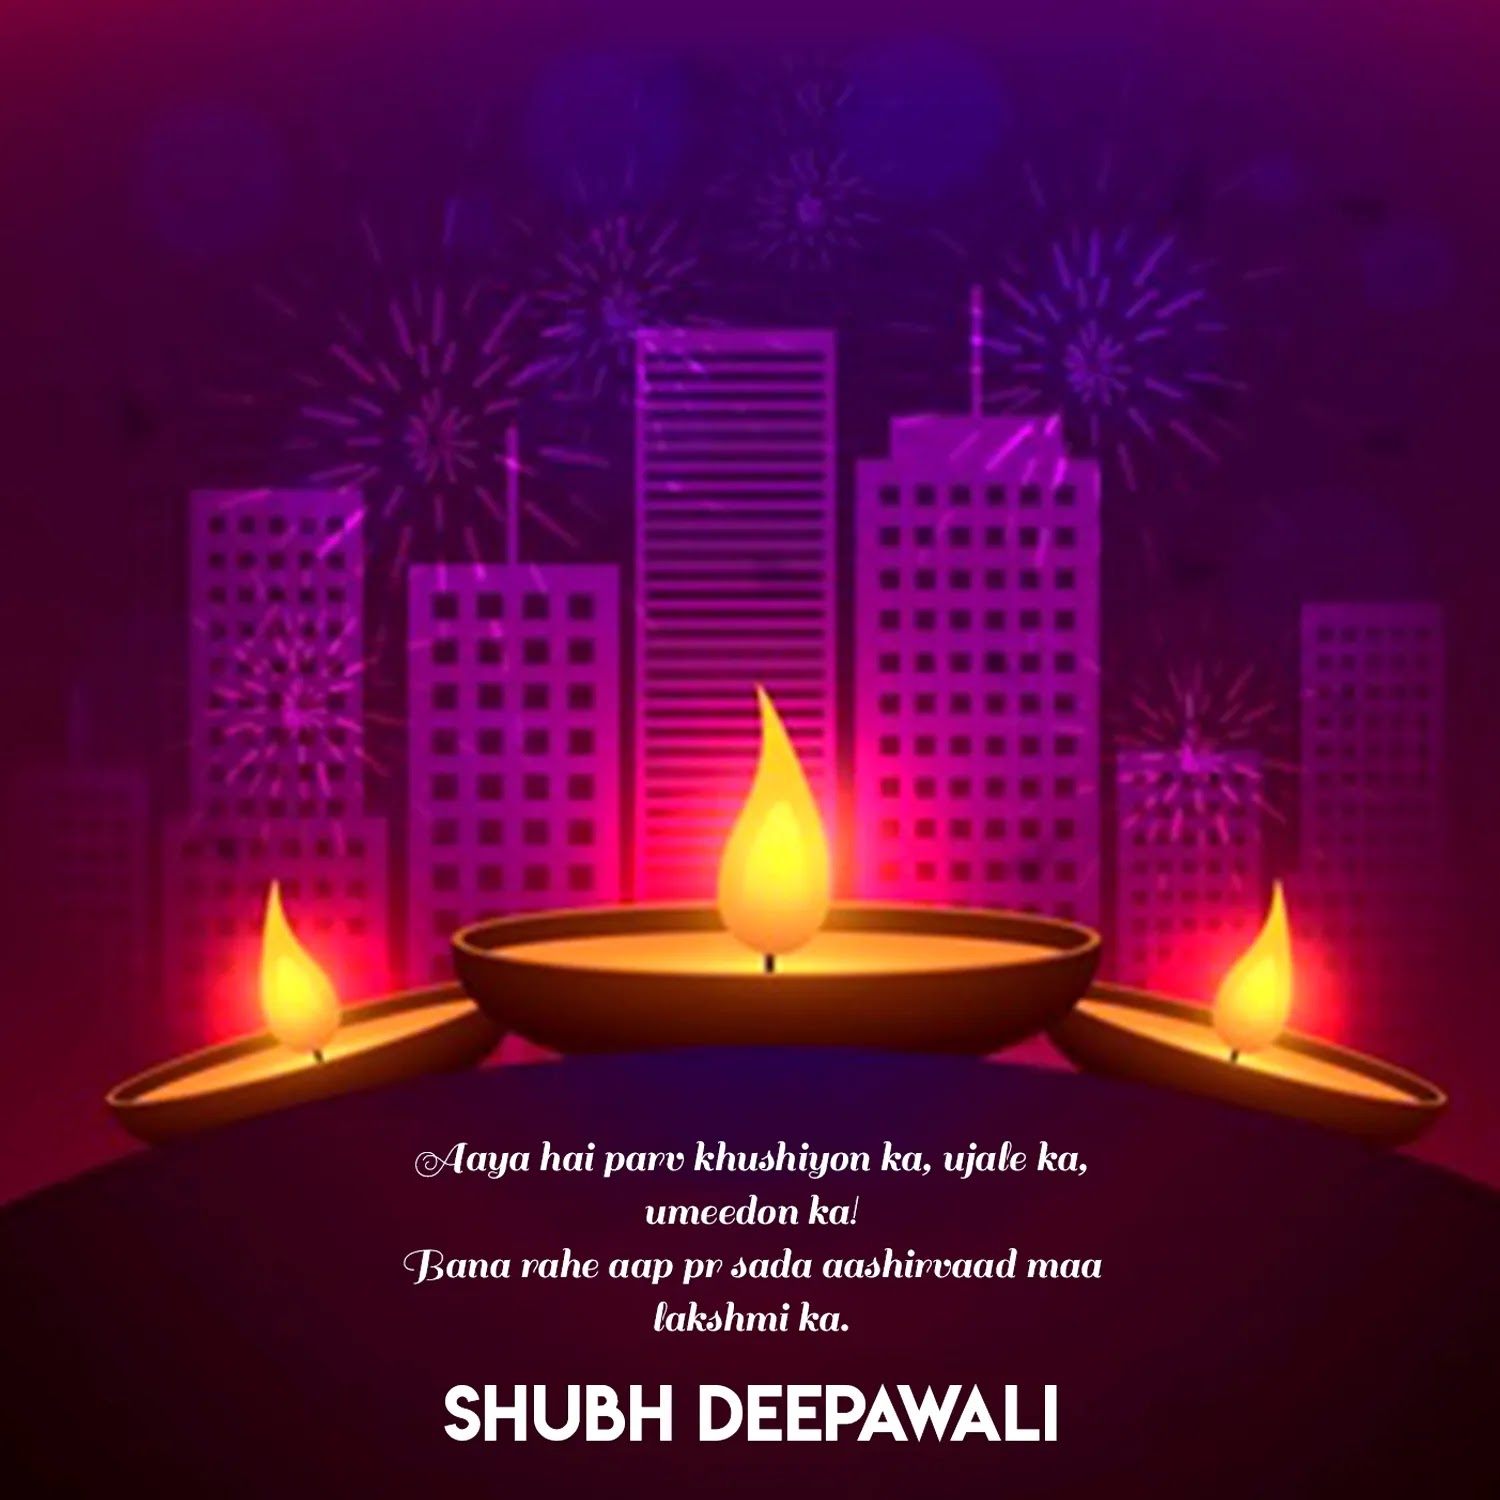 Happy Diwali Quotes, Wishes wallpaper hd, Happy Diwali 2022 HD Images free Download